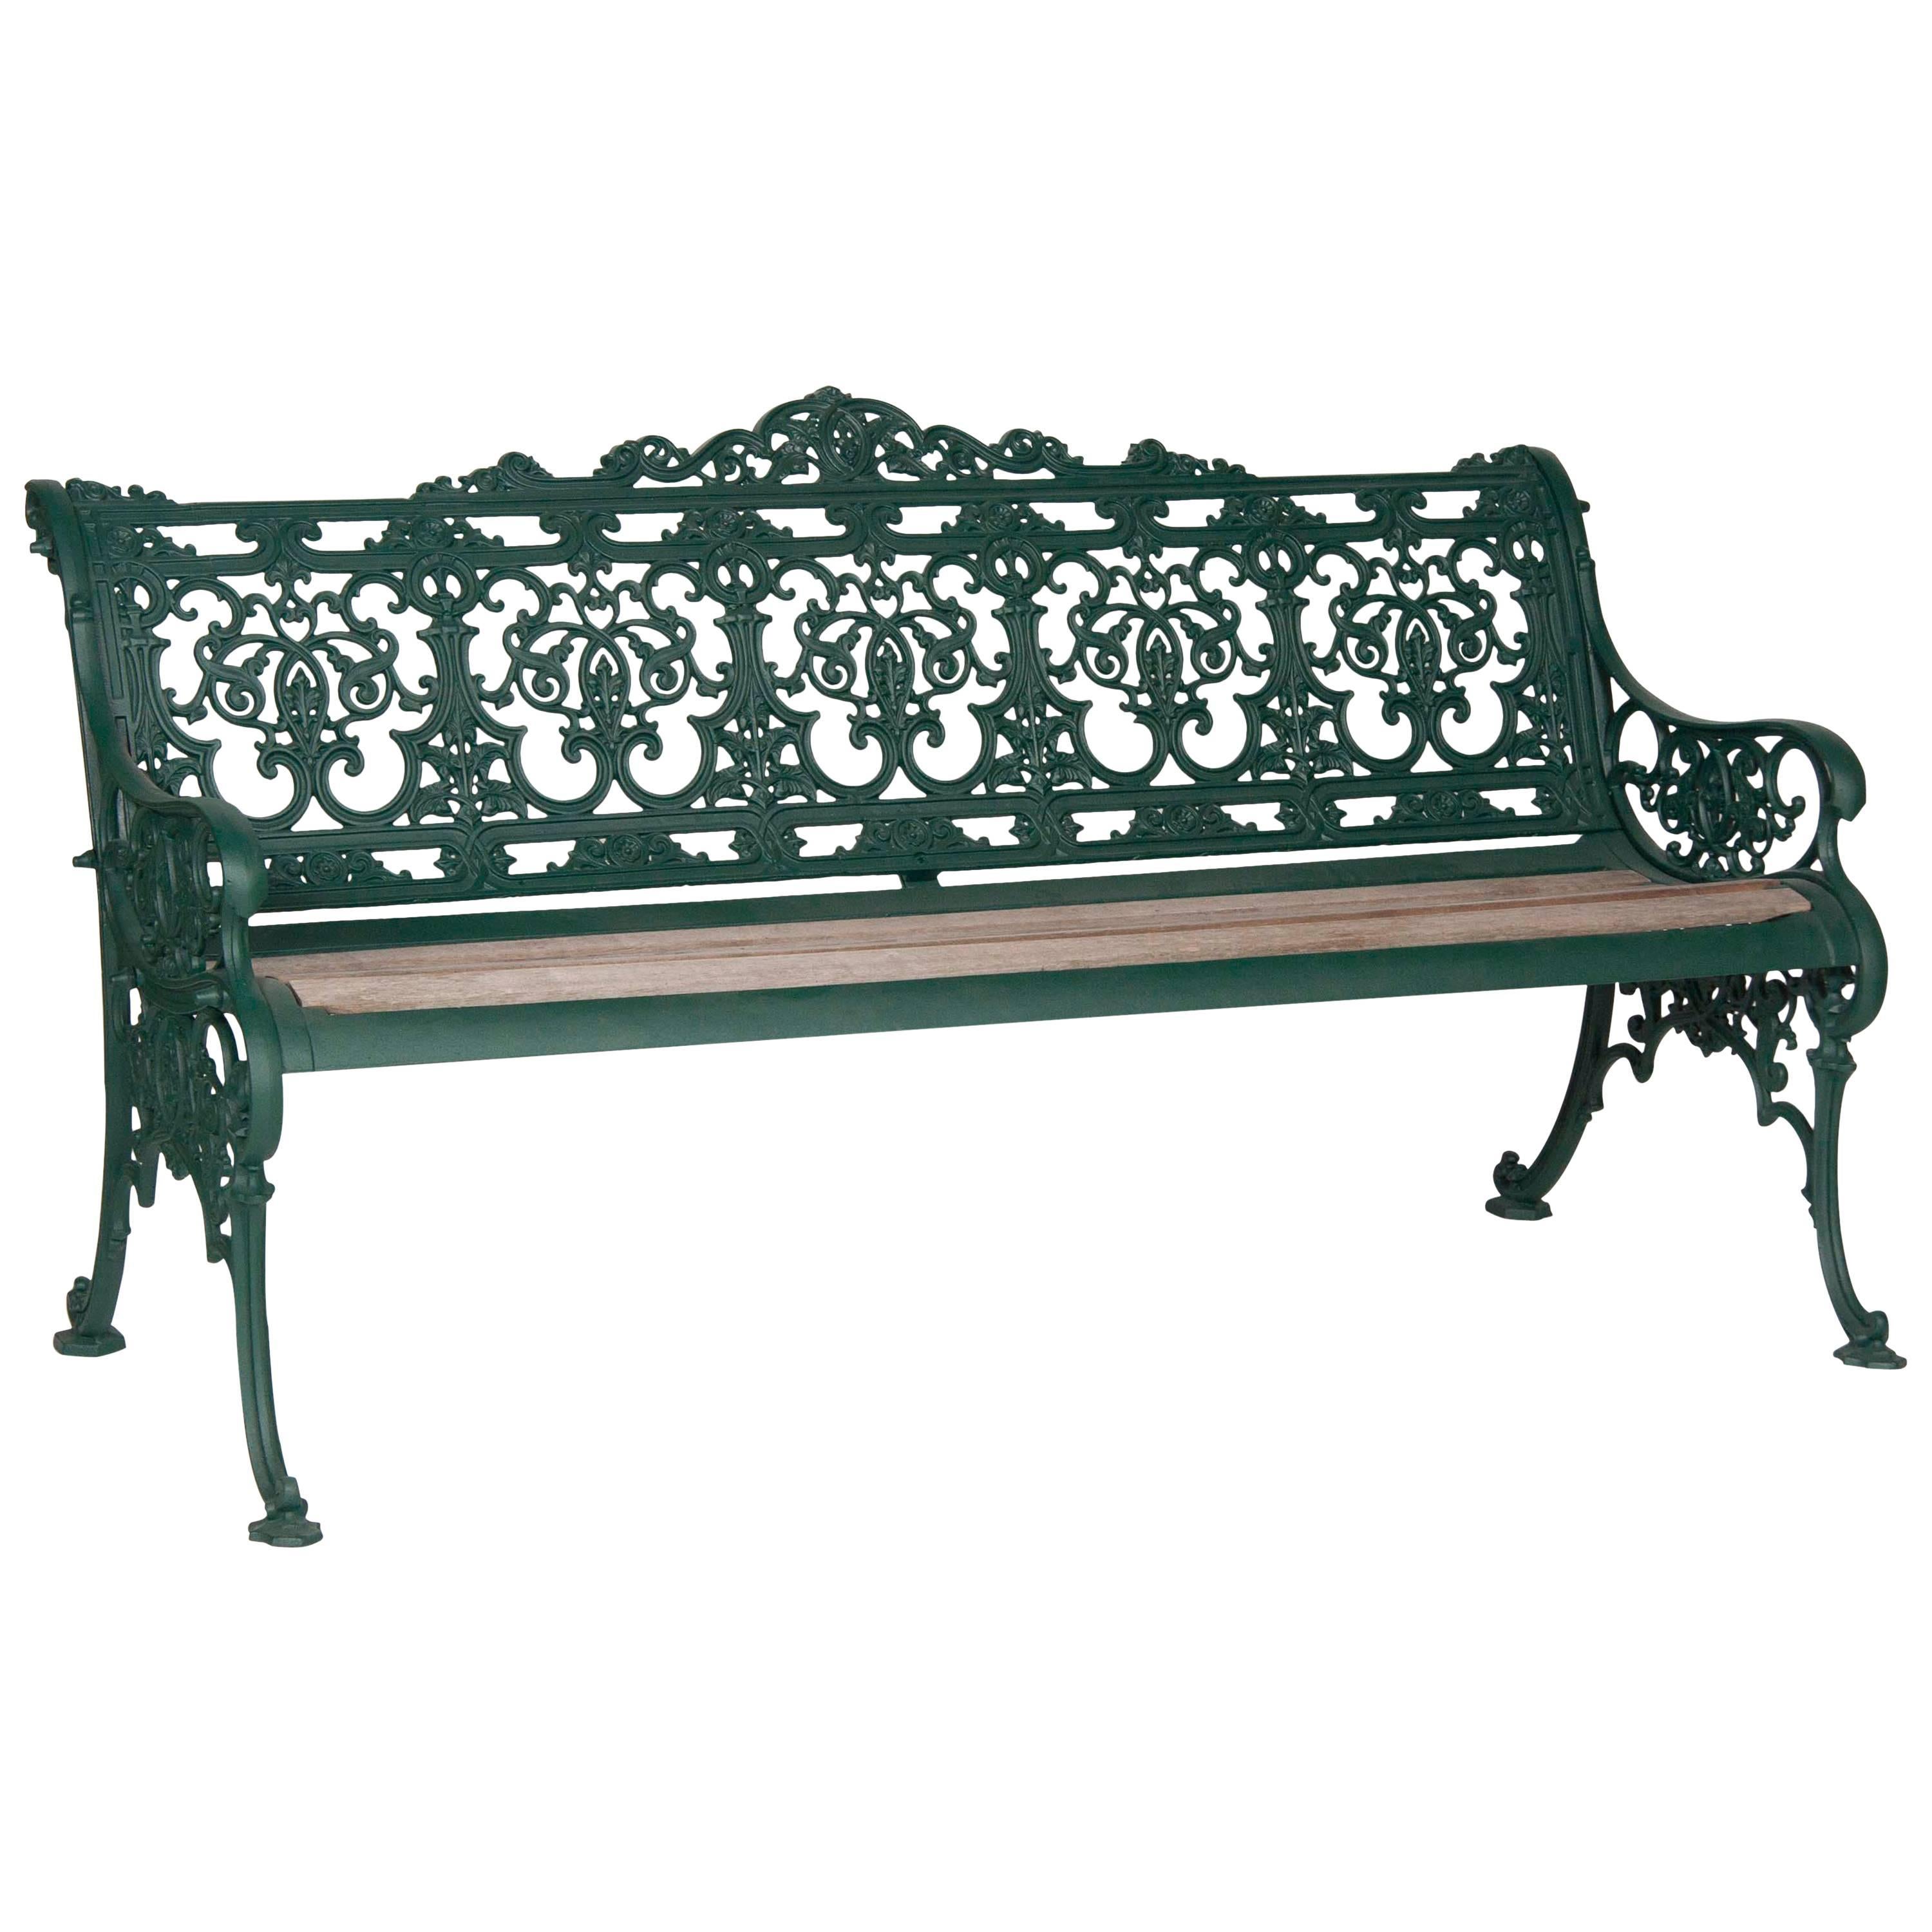  Cast Iron Bench by Andrew McLaren & Co